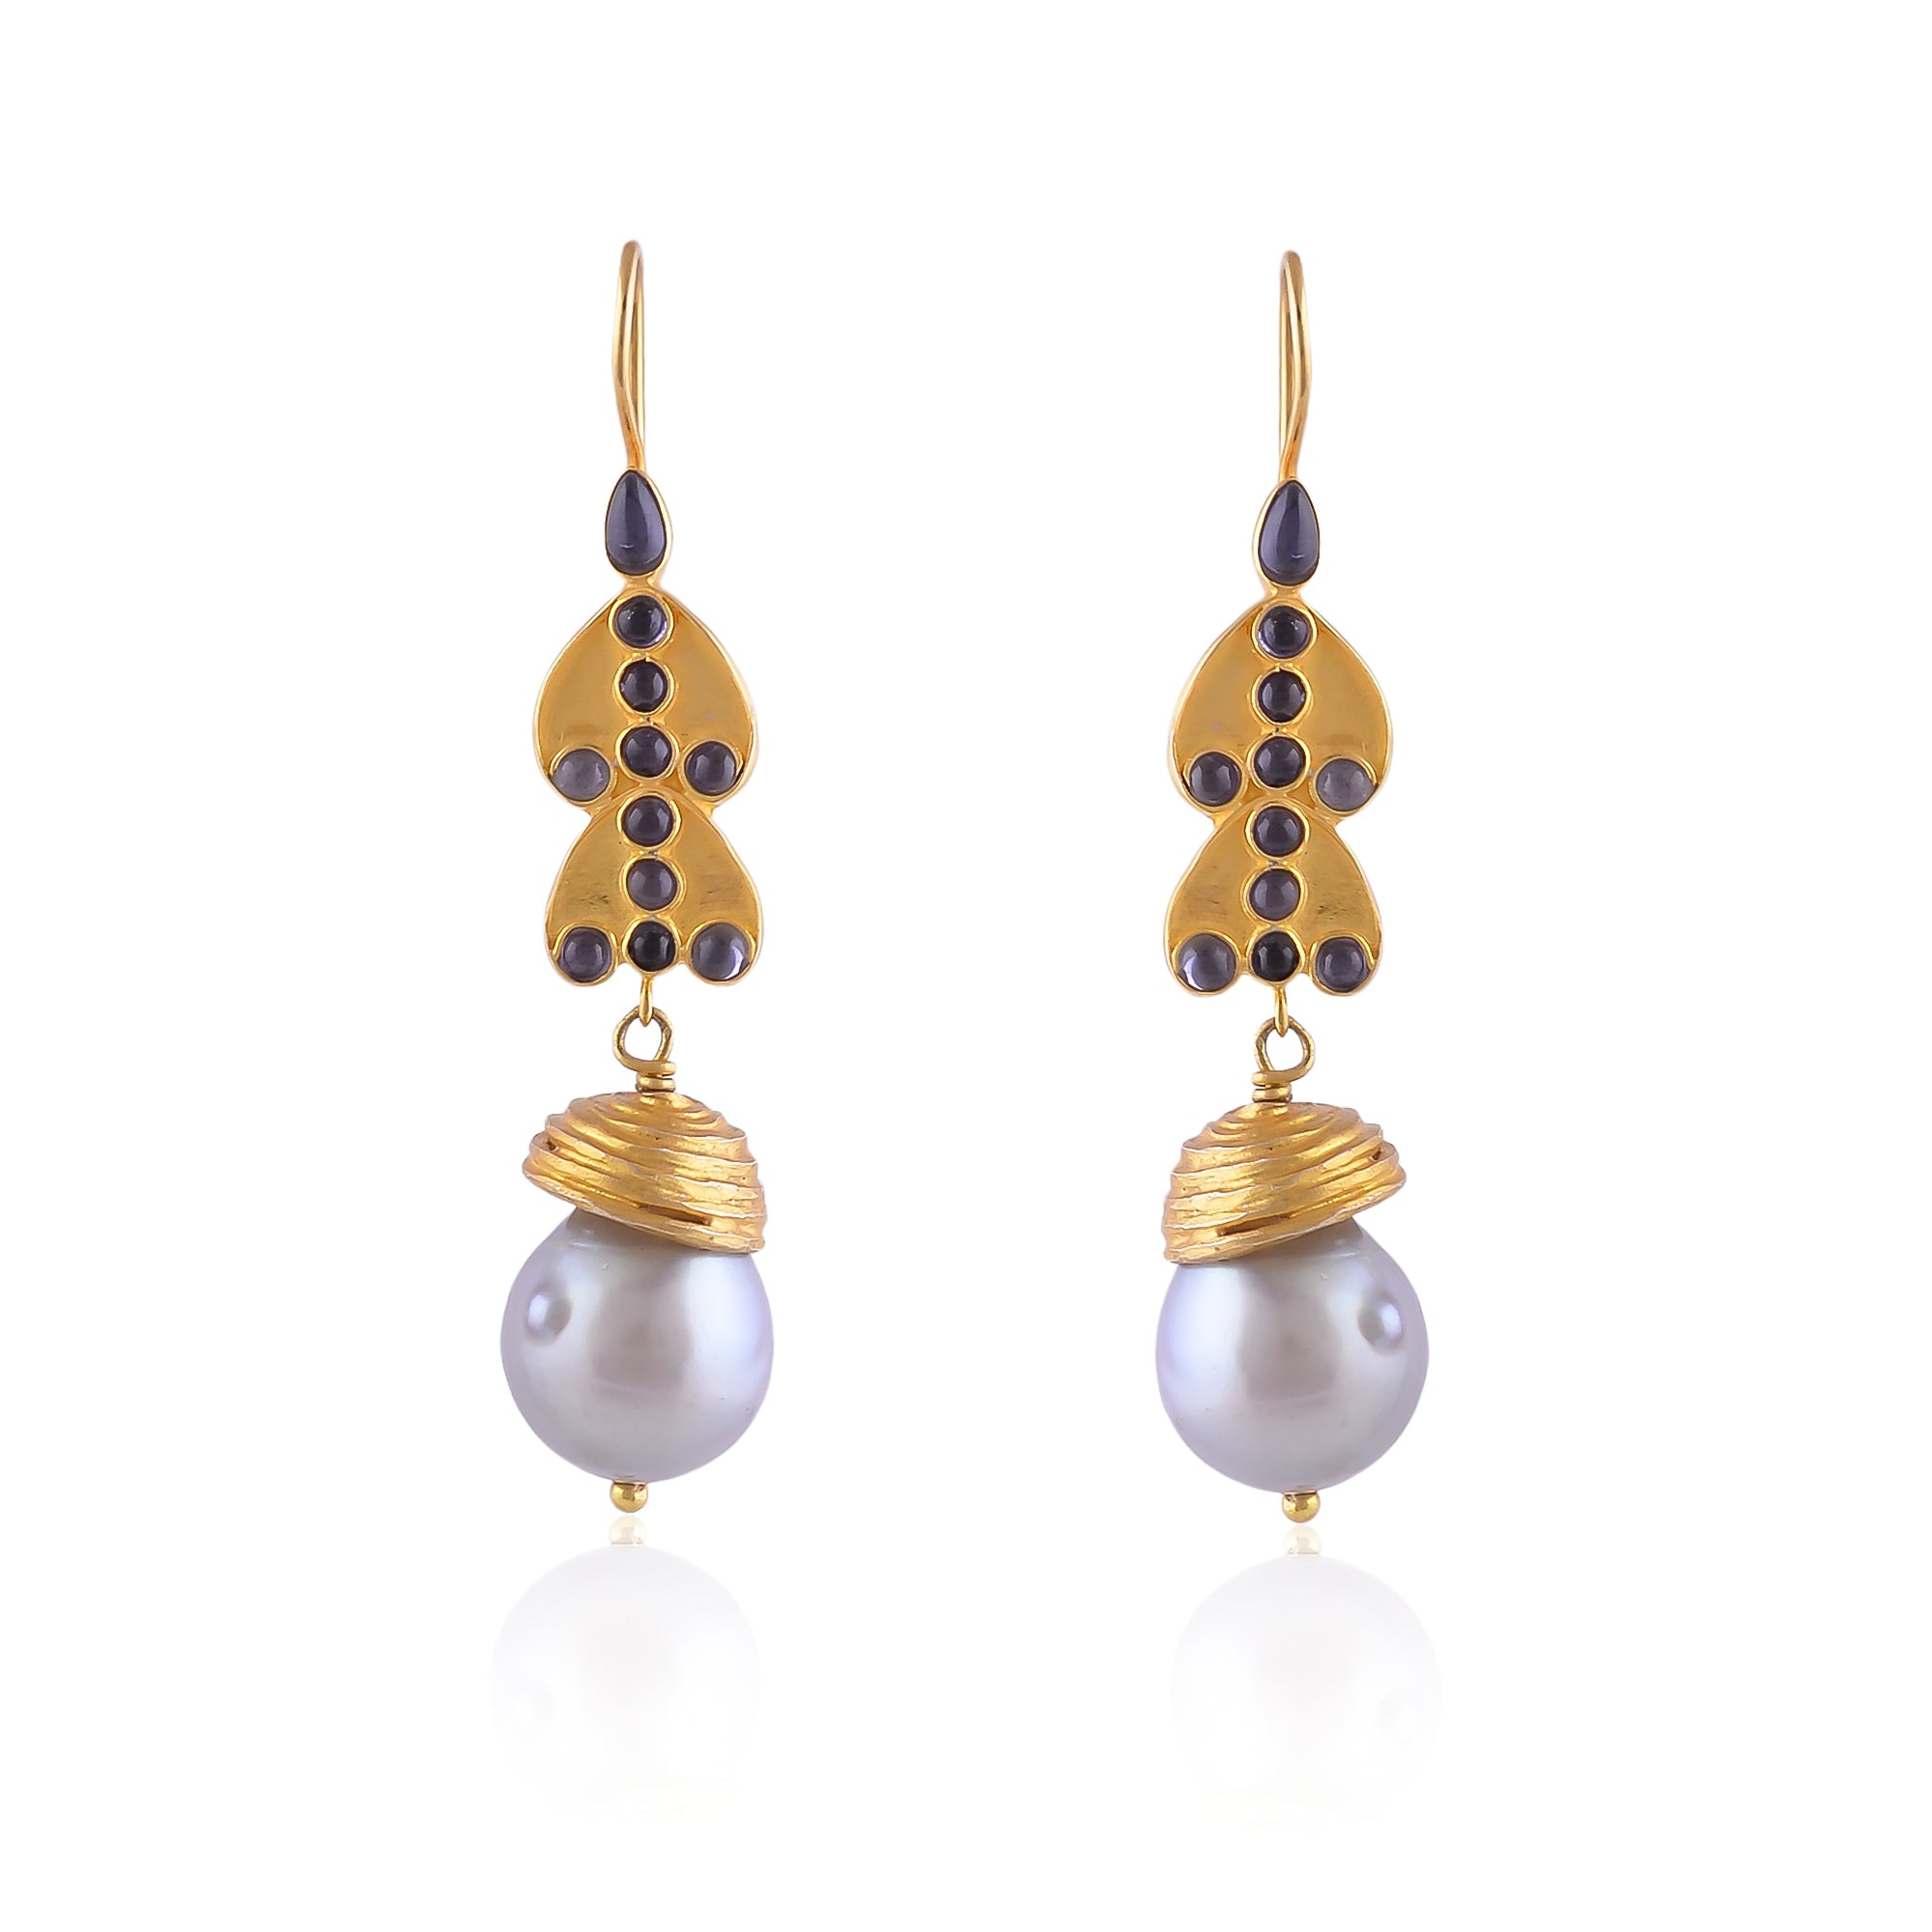 Buy Hand Crafted Silver Gold Plated Iolite/grey Pearl Earring